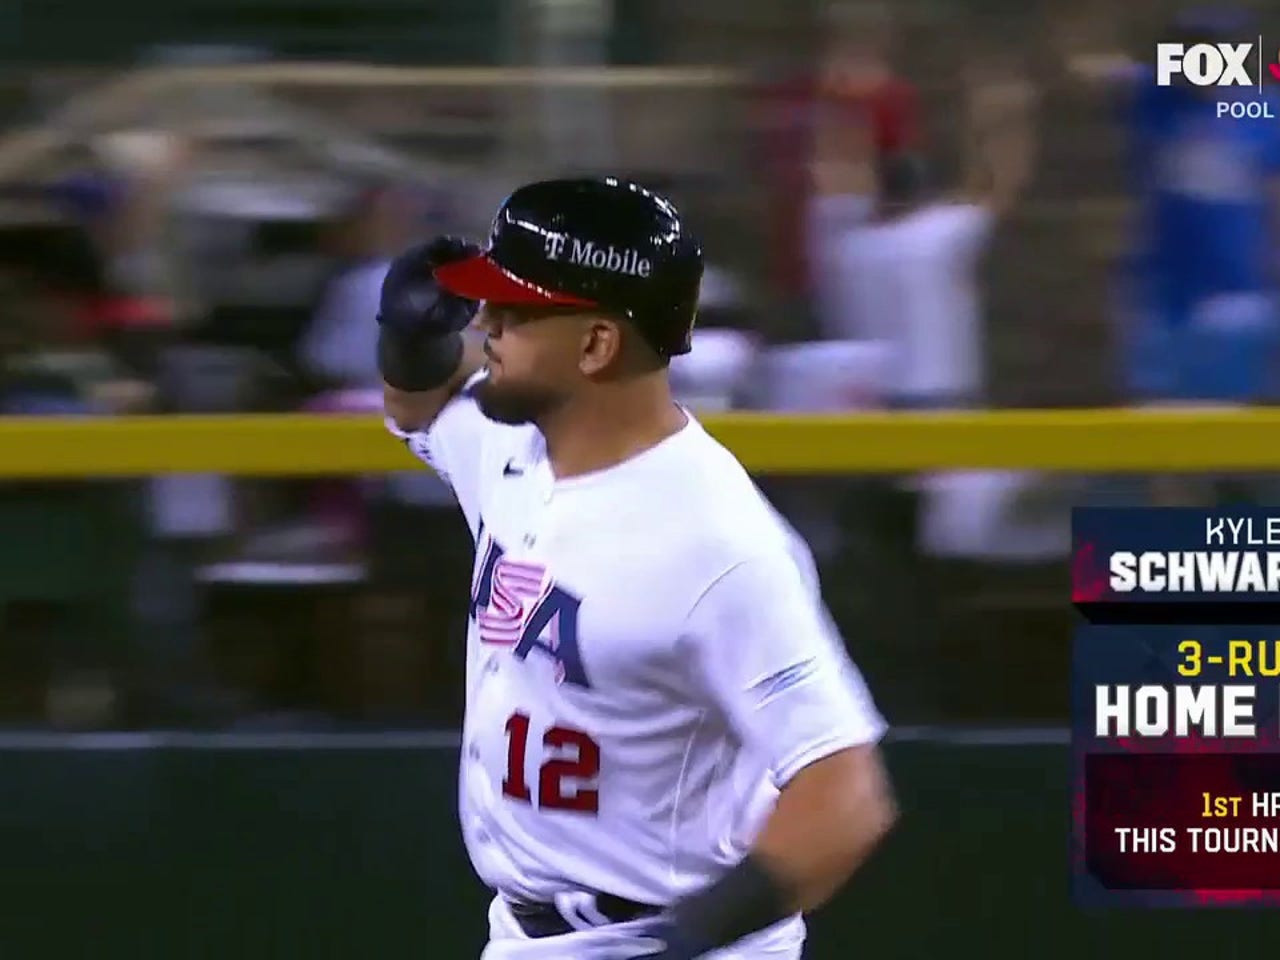 The NL home run king is bringing SCHWARBOMBS to #TeamUSA Kyle Schwarber is  ALL IN #ForGlory🇺🇸